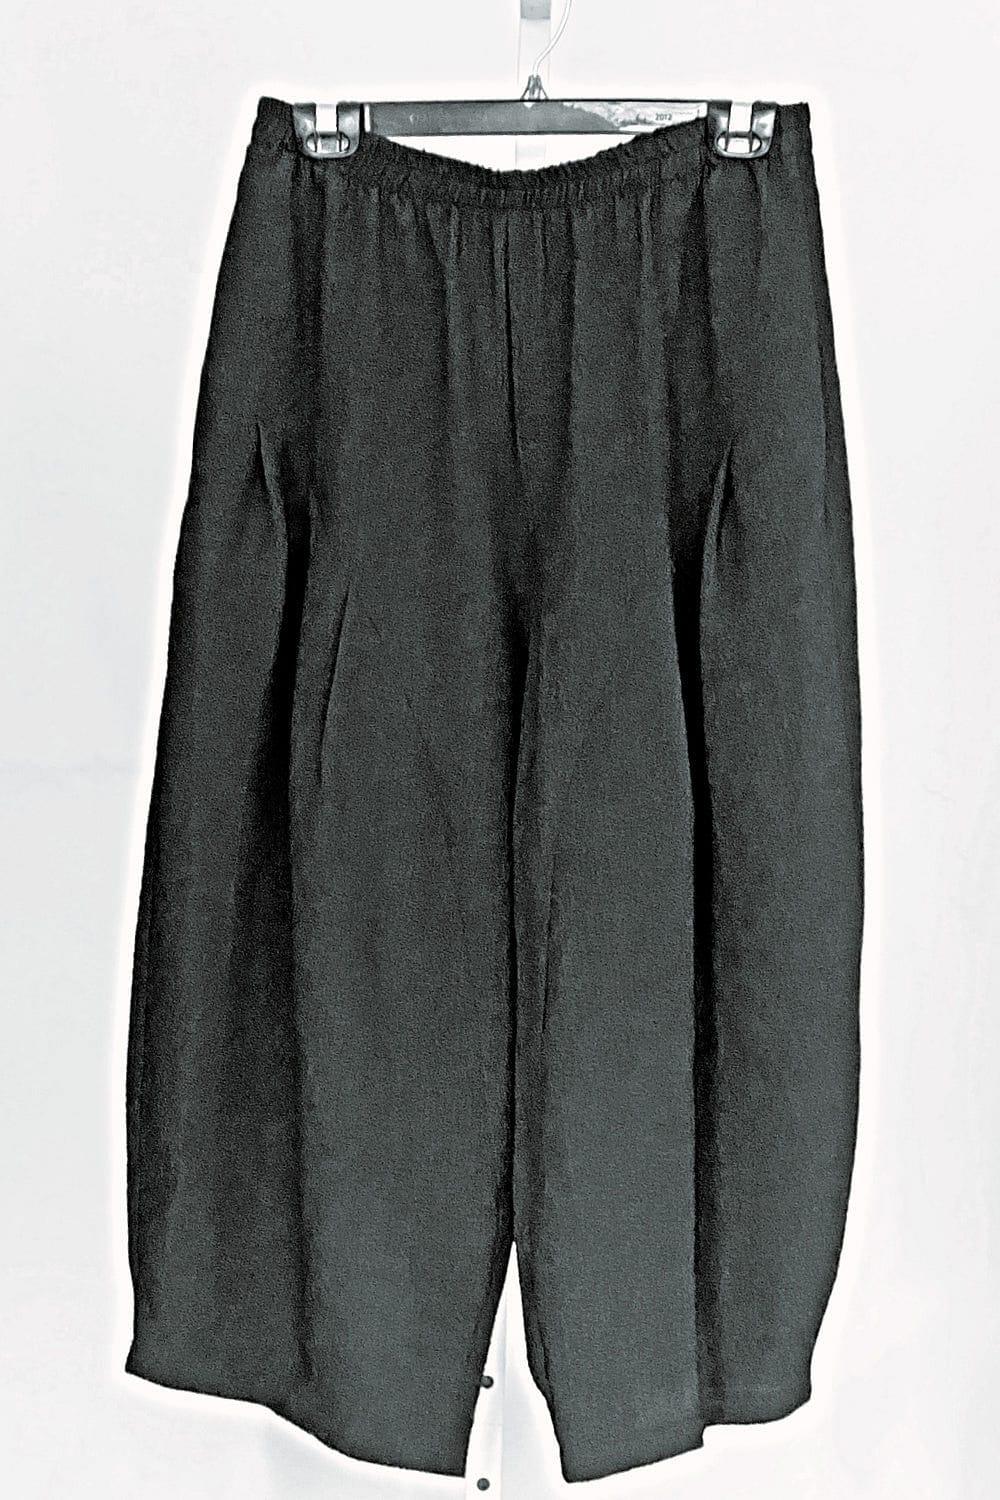 Close up of black full leg pant with front pleast detail and a diagonal hemline. The pant is hanging from a hanger.